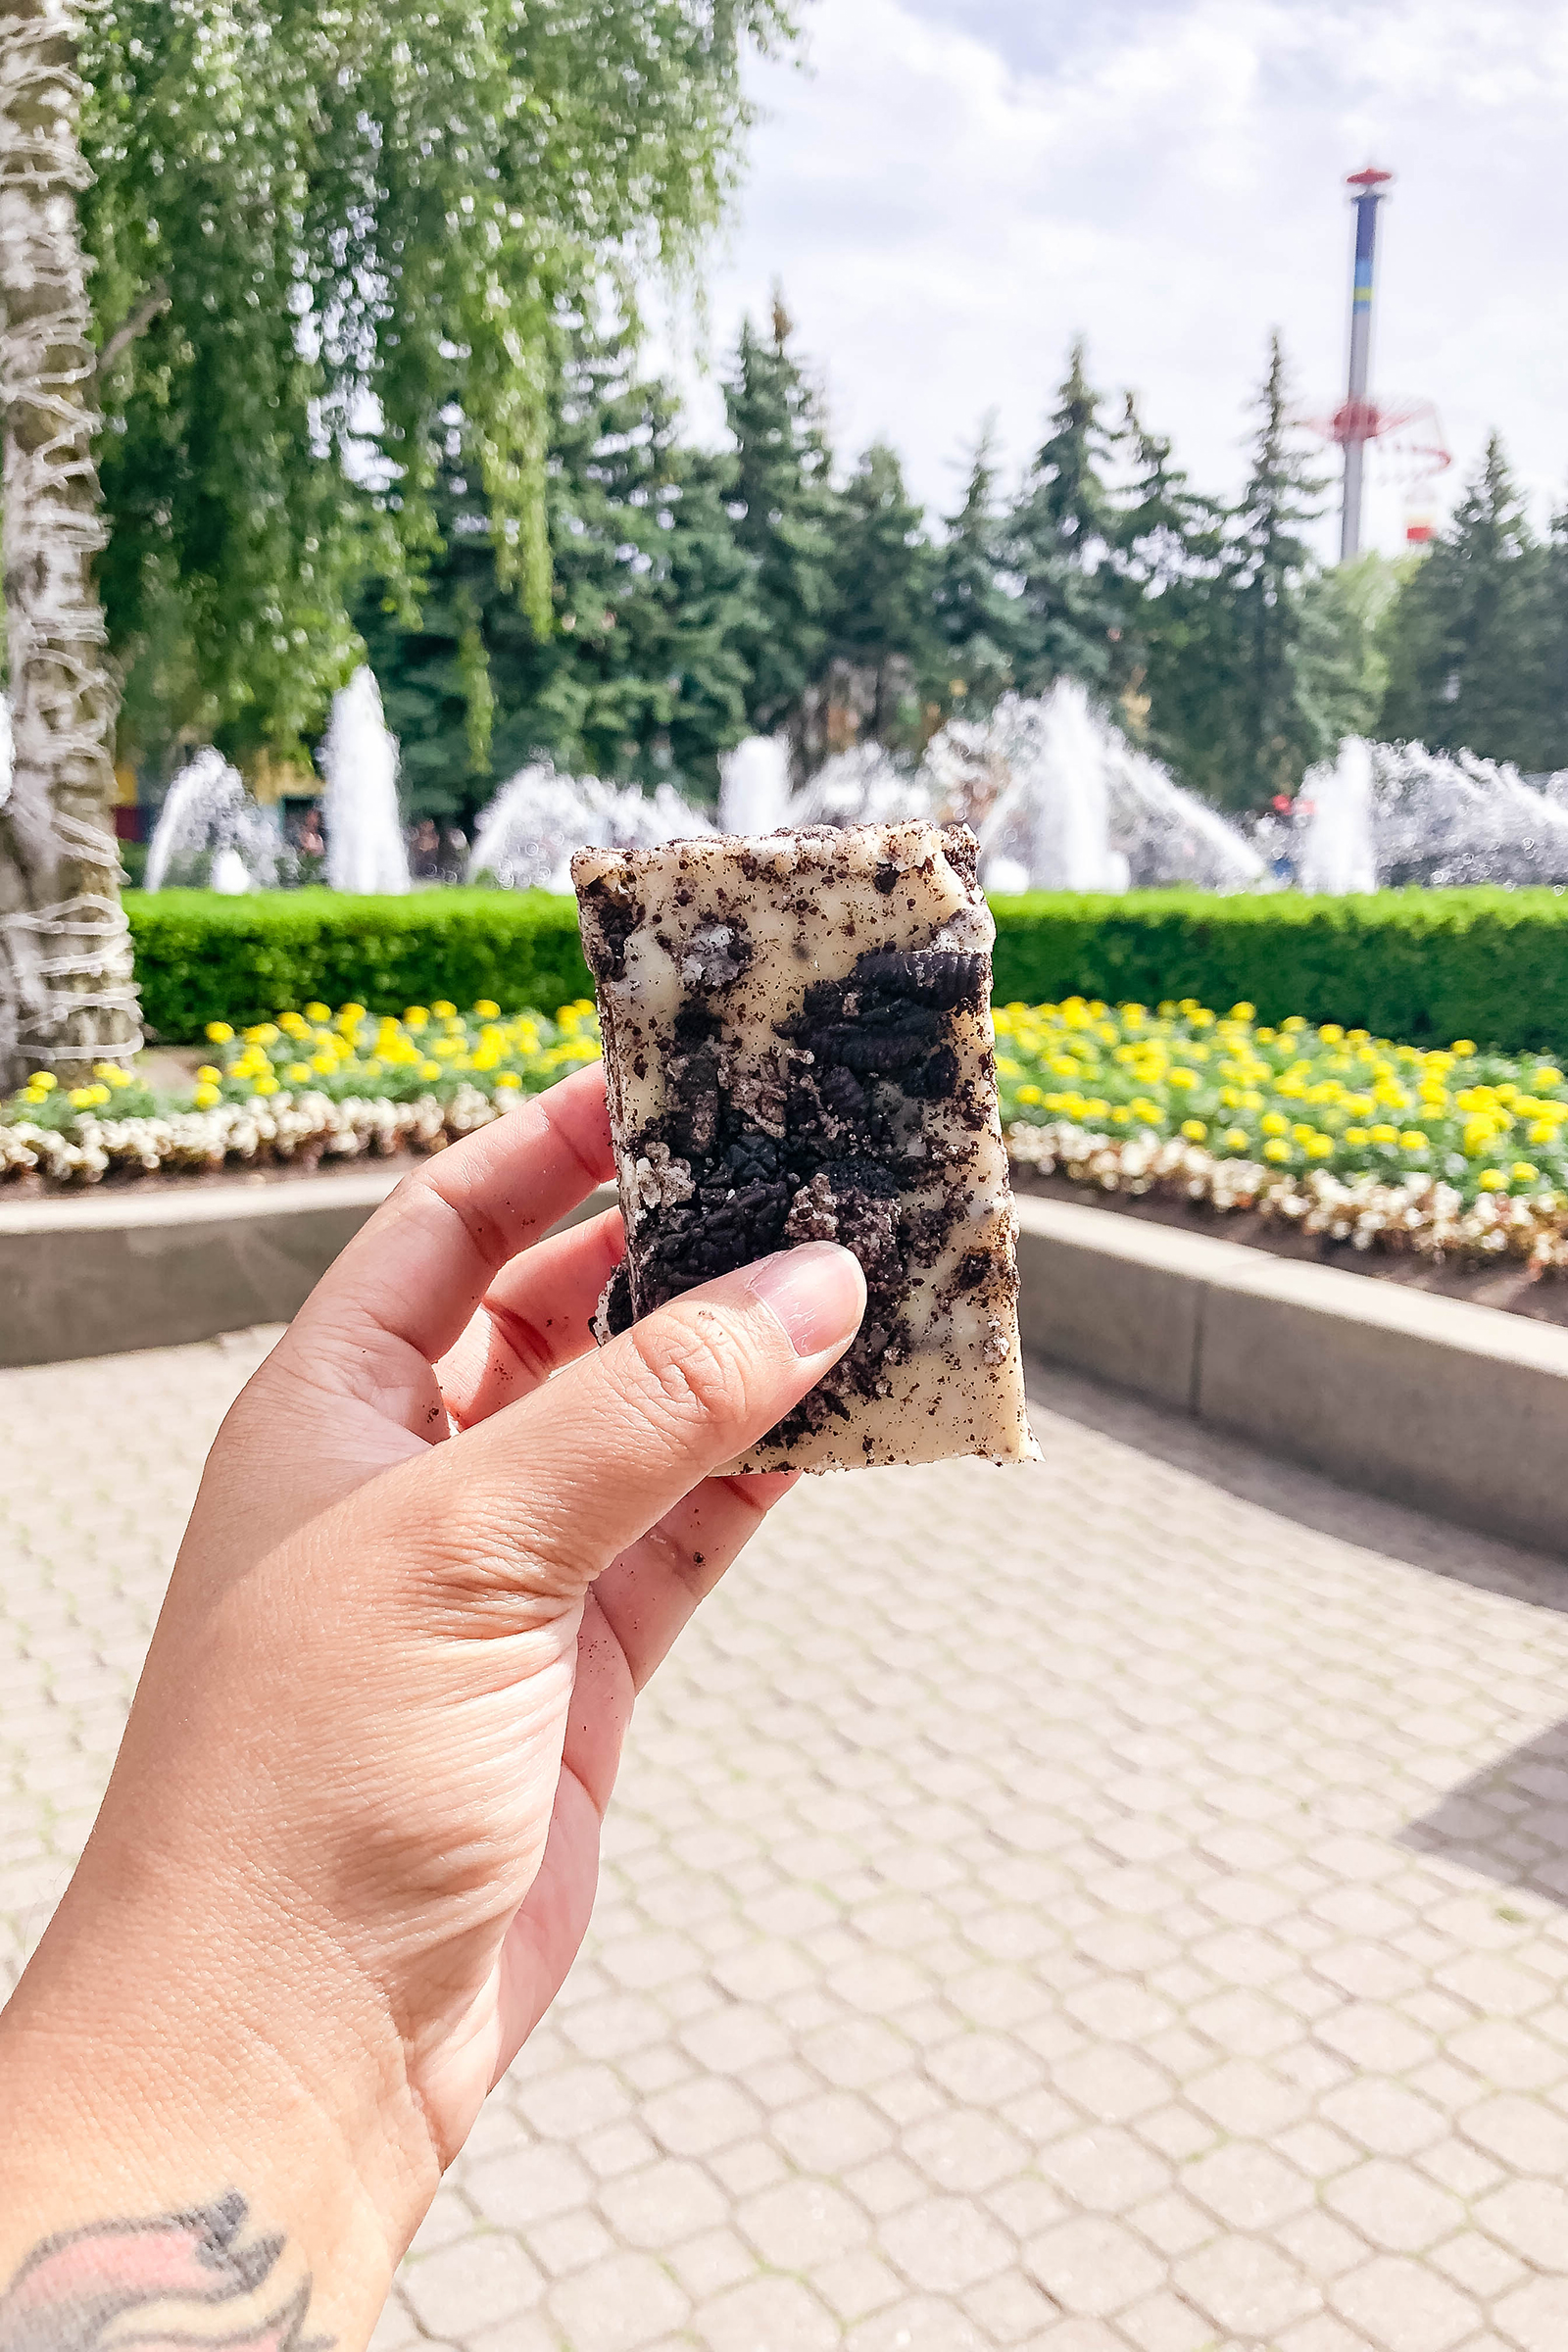 How to Be a Foodie at Canada’s Wonderland: Snacks You Won’t Want to Miss